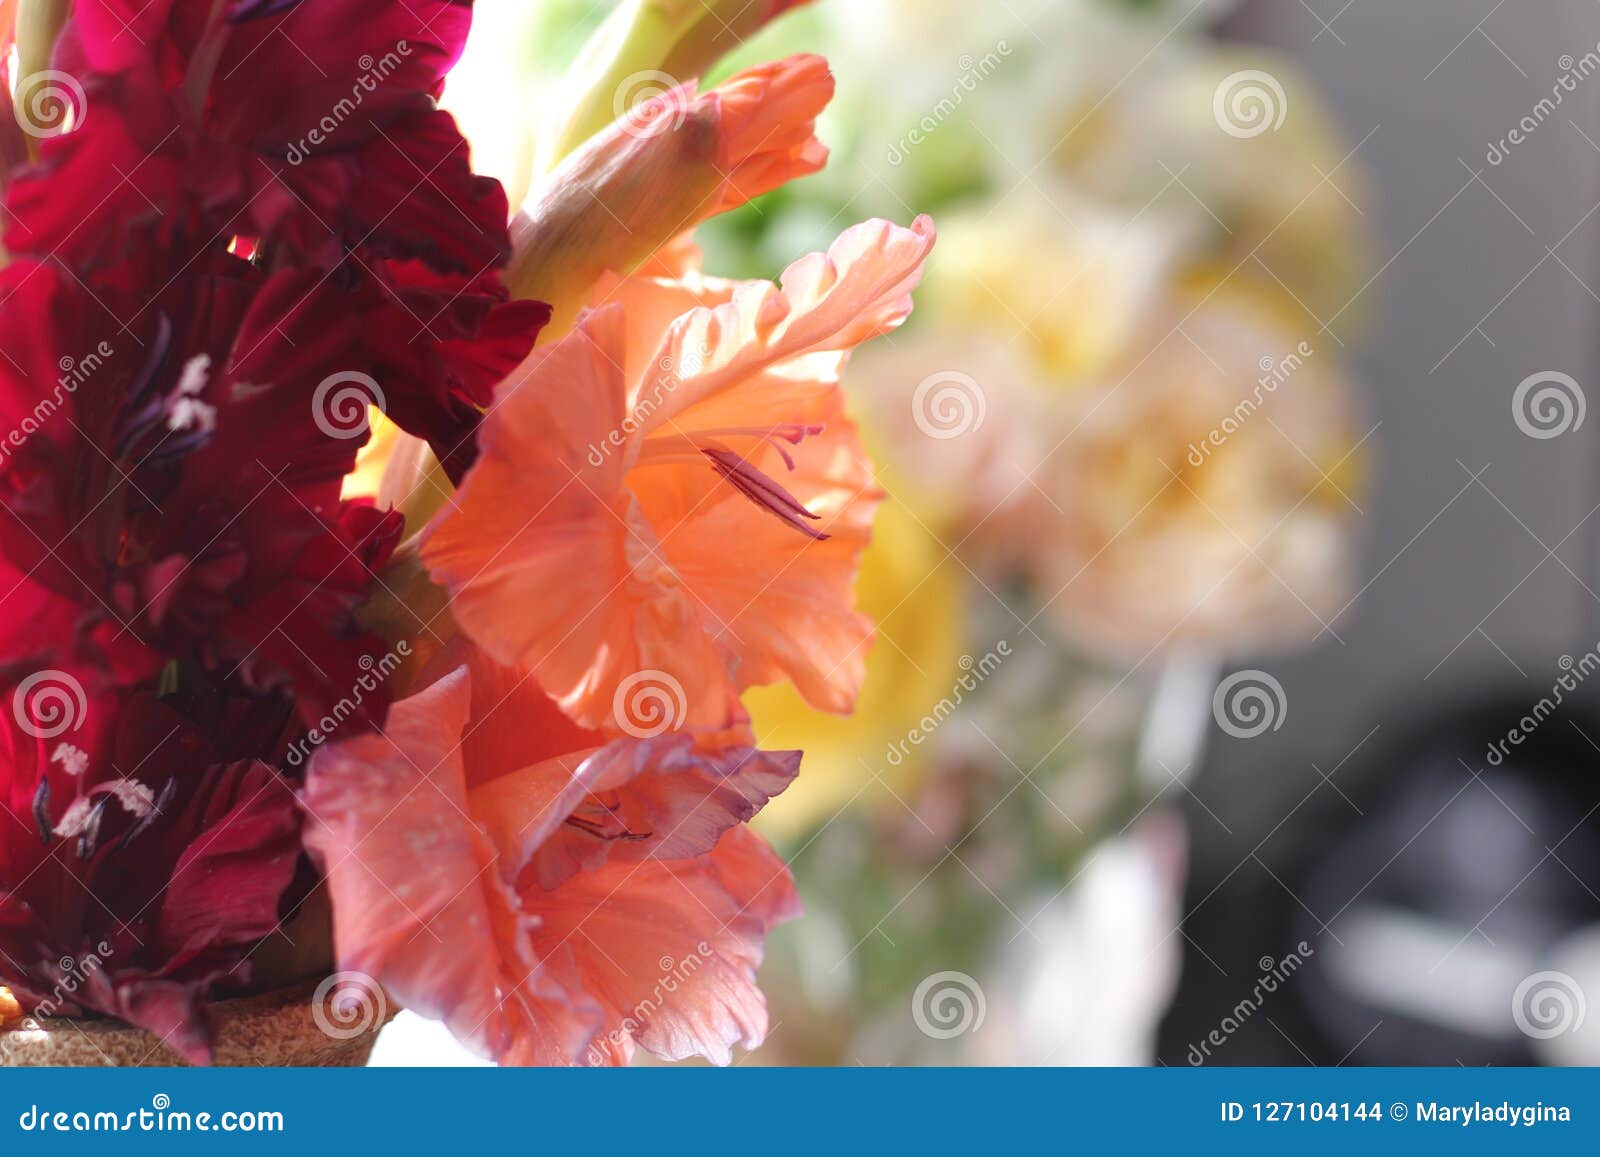 Bouquet of Gladioluses Red and Peach Delicate Background Stock Photo ...